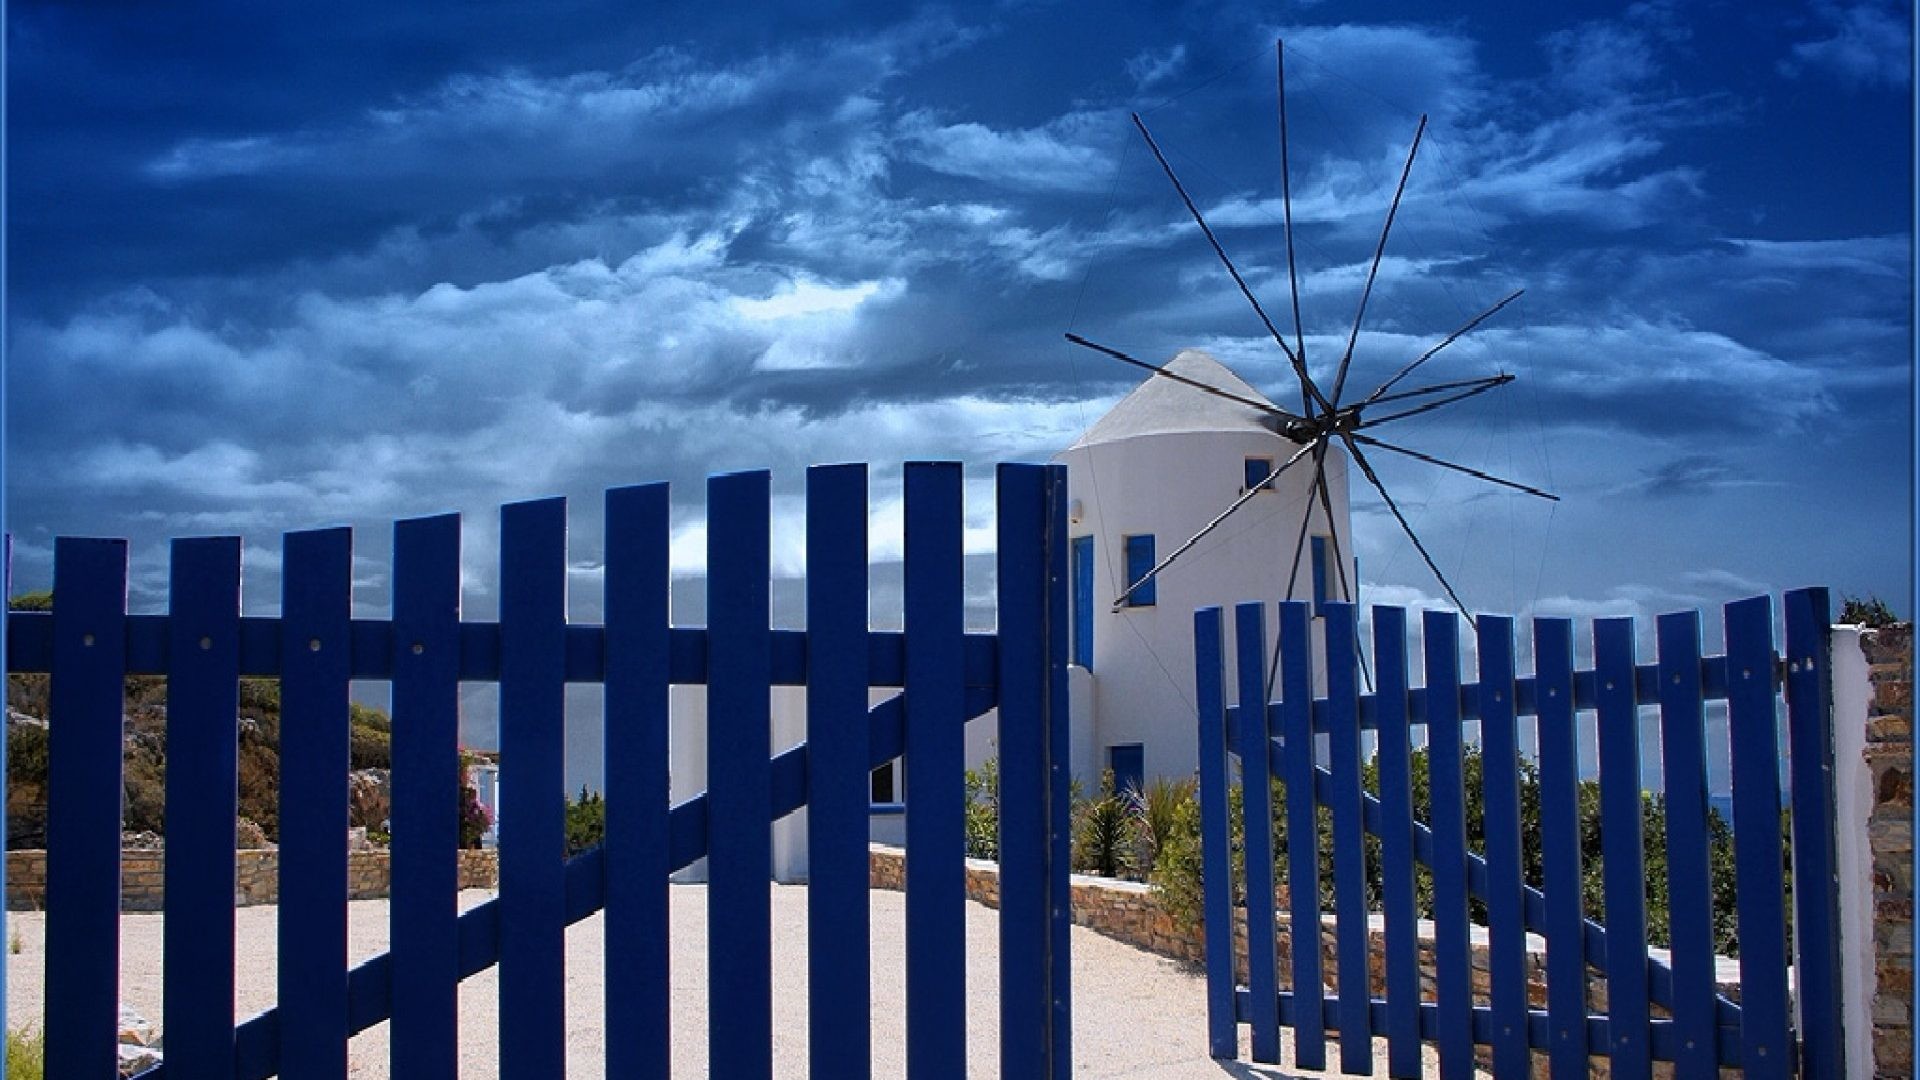 1920x1080 Other - Greek Windmill Blue Fence Sky Kind Windmil Clouds Gallery for HD  16:9